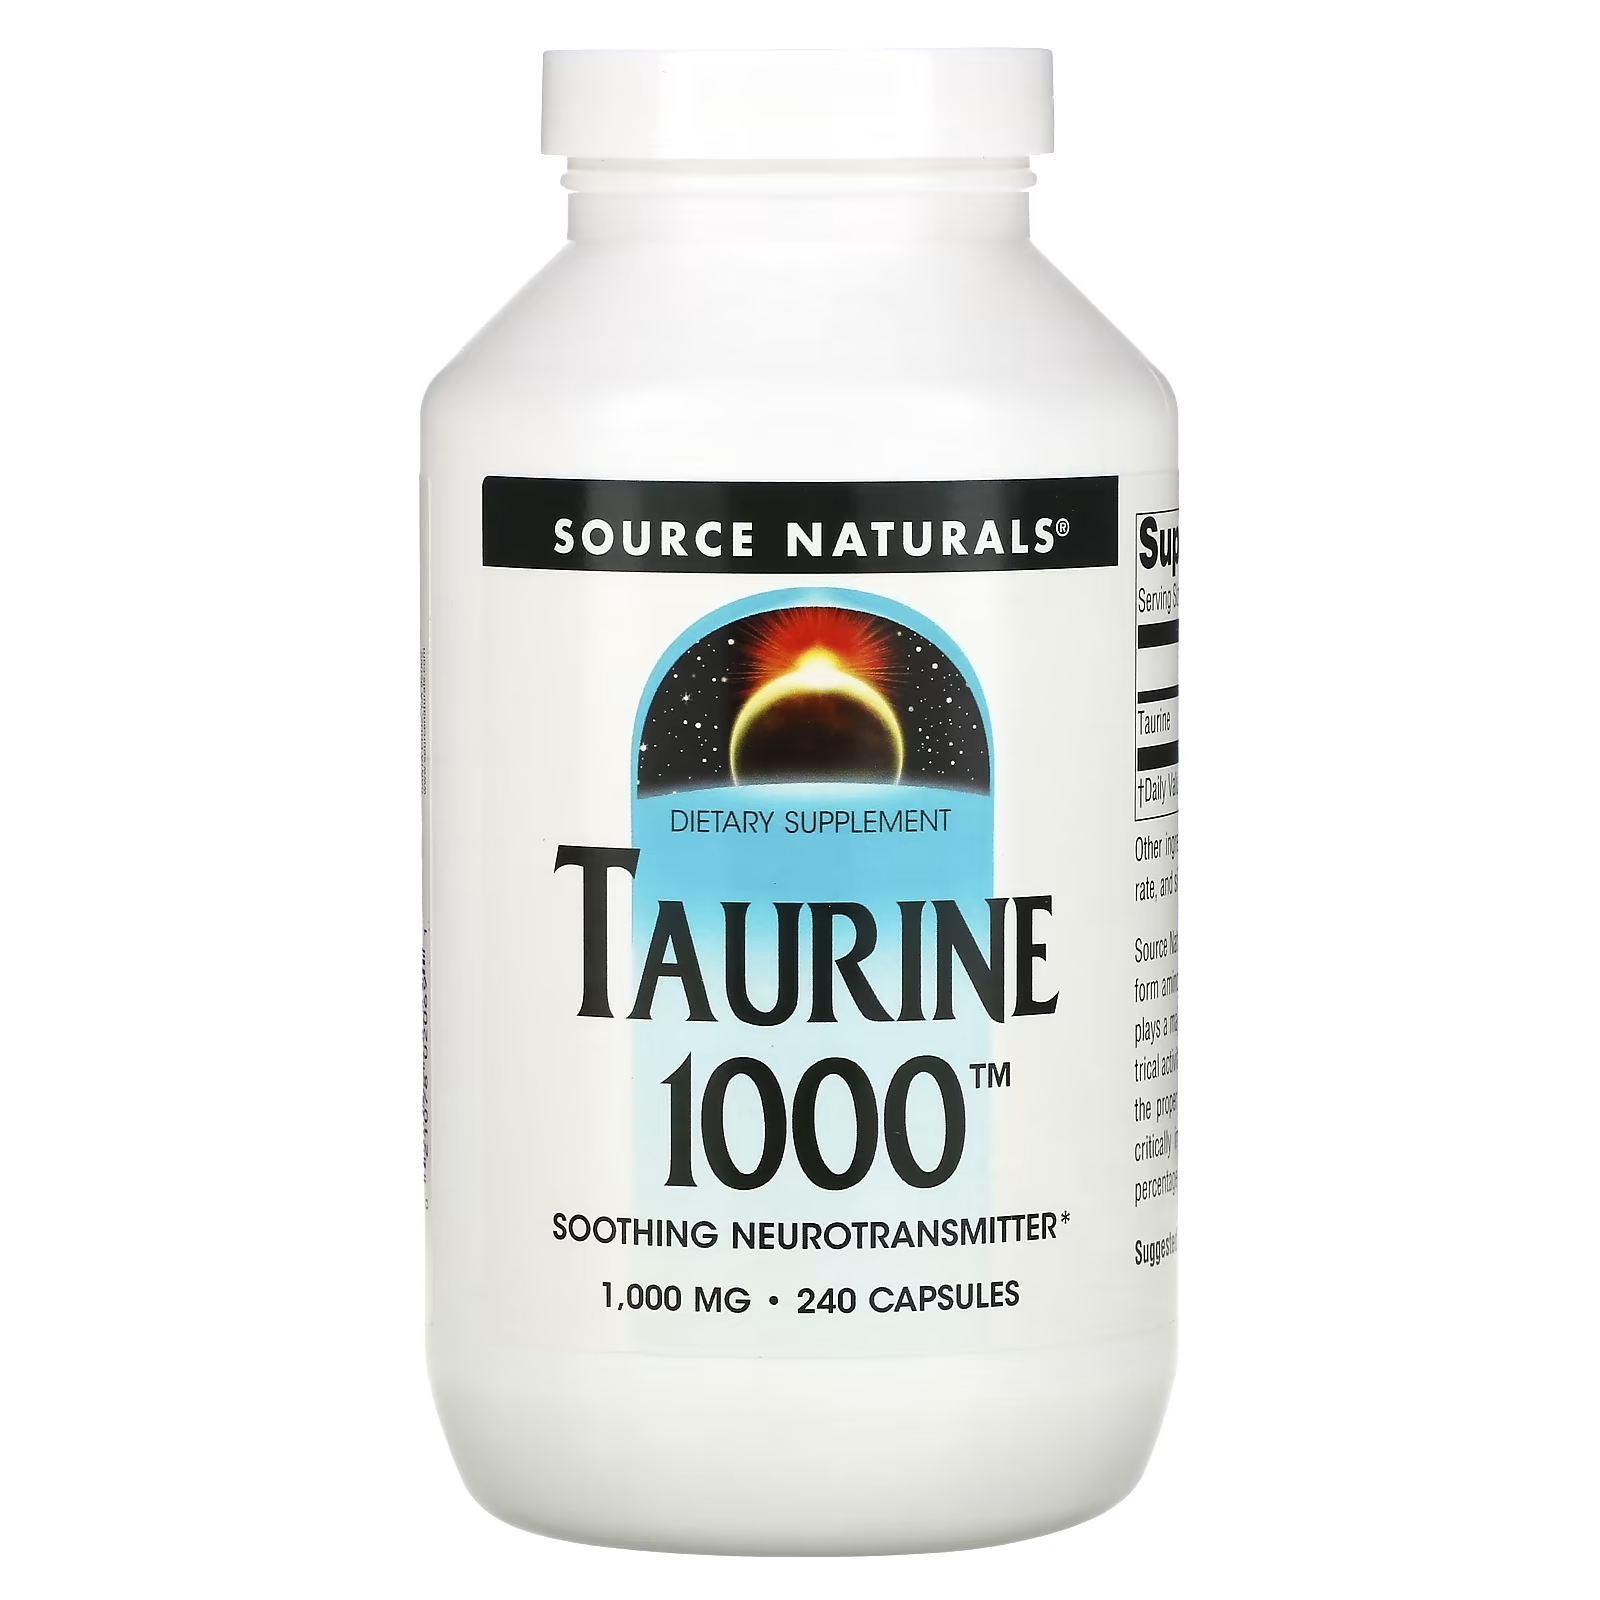 Source Naturals Таурин 1000 мг, 240 капсул source naturals перилловое масло 1000 мг 90 гелевых капсул